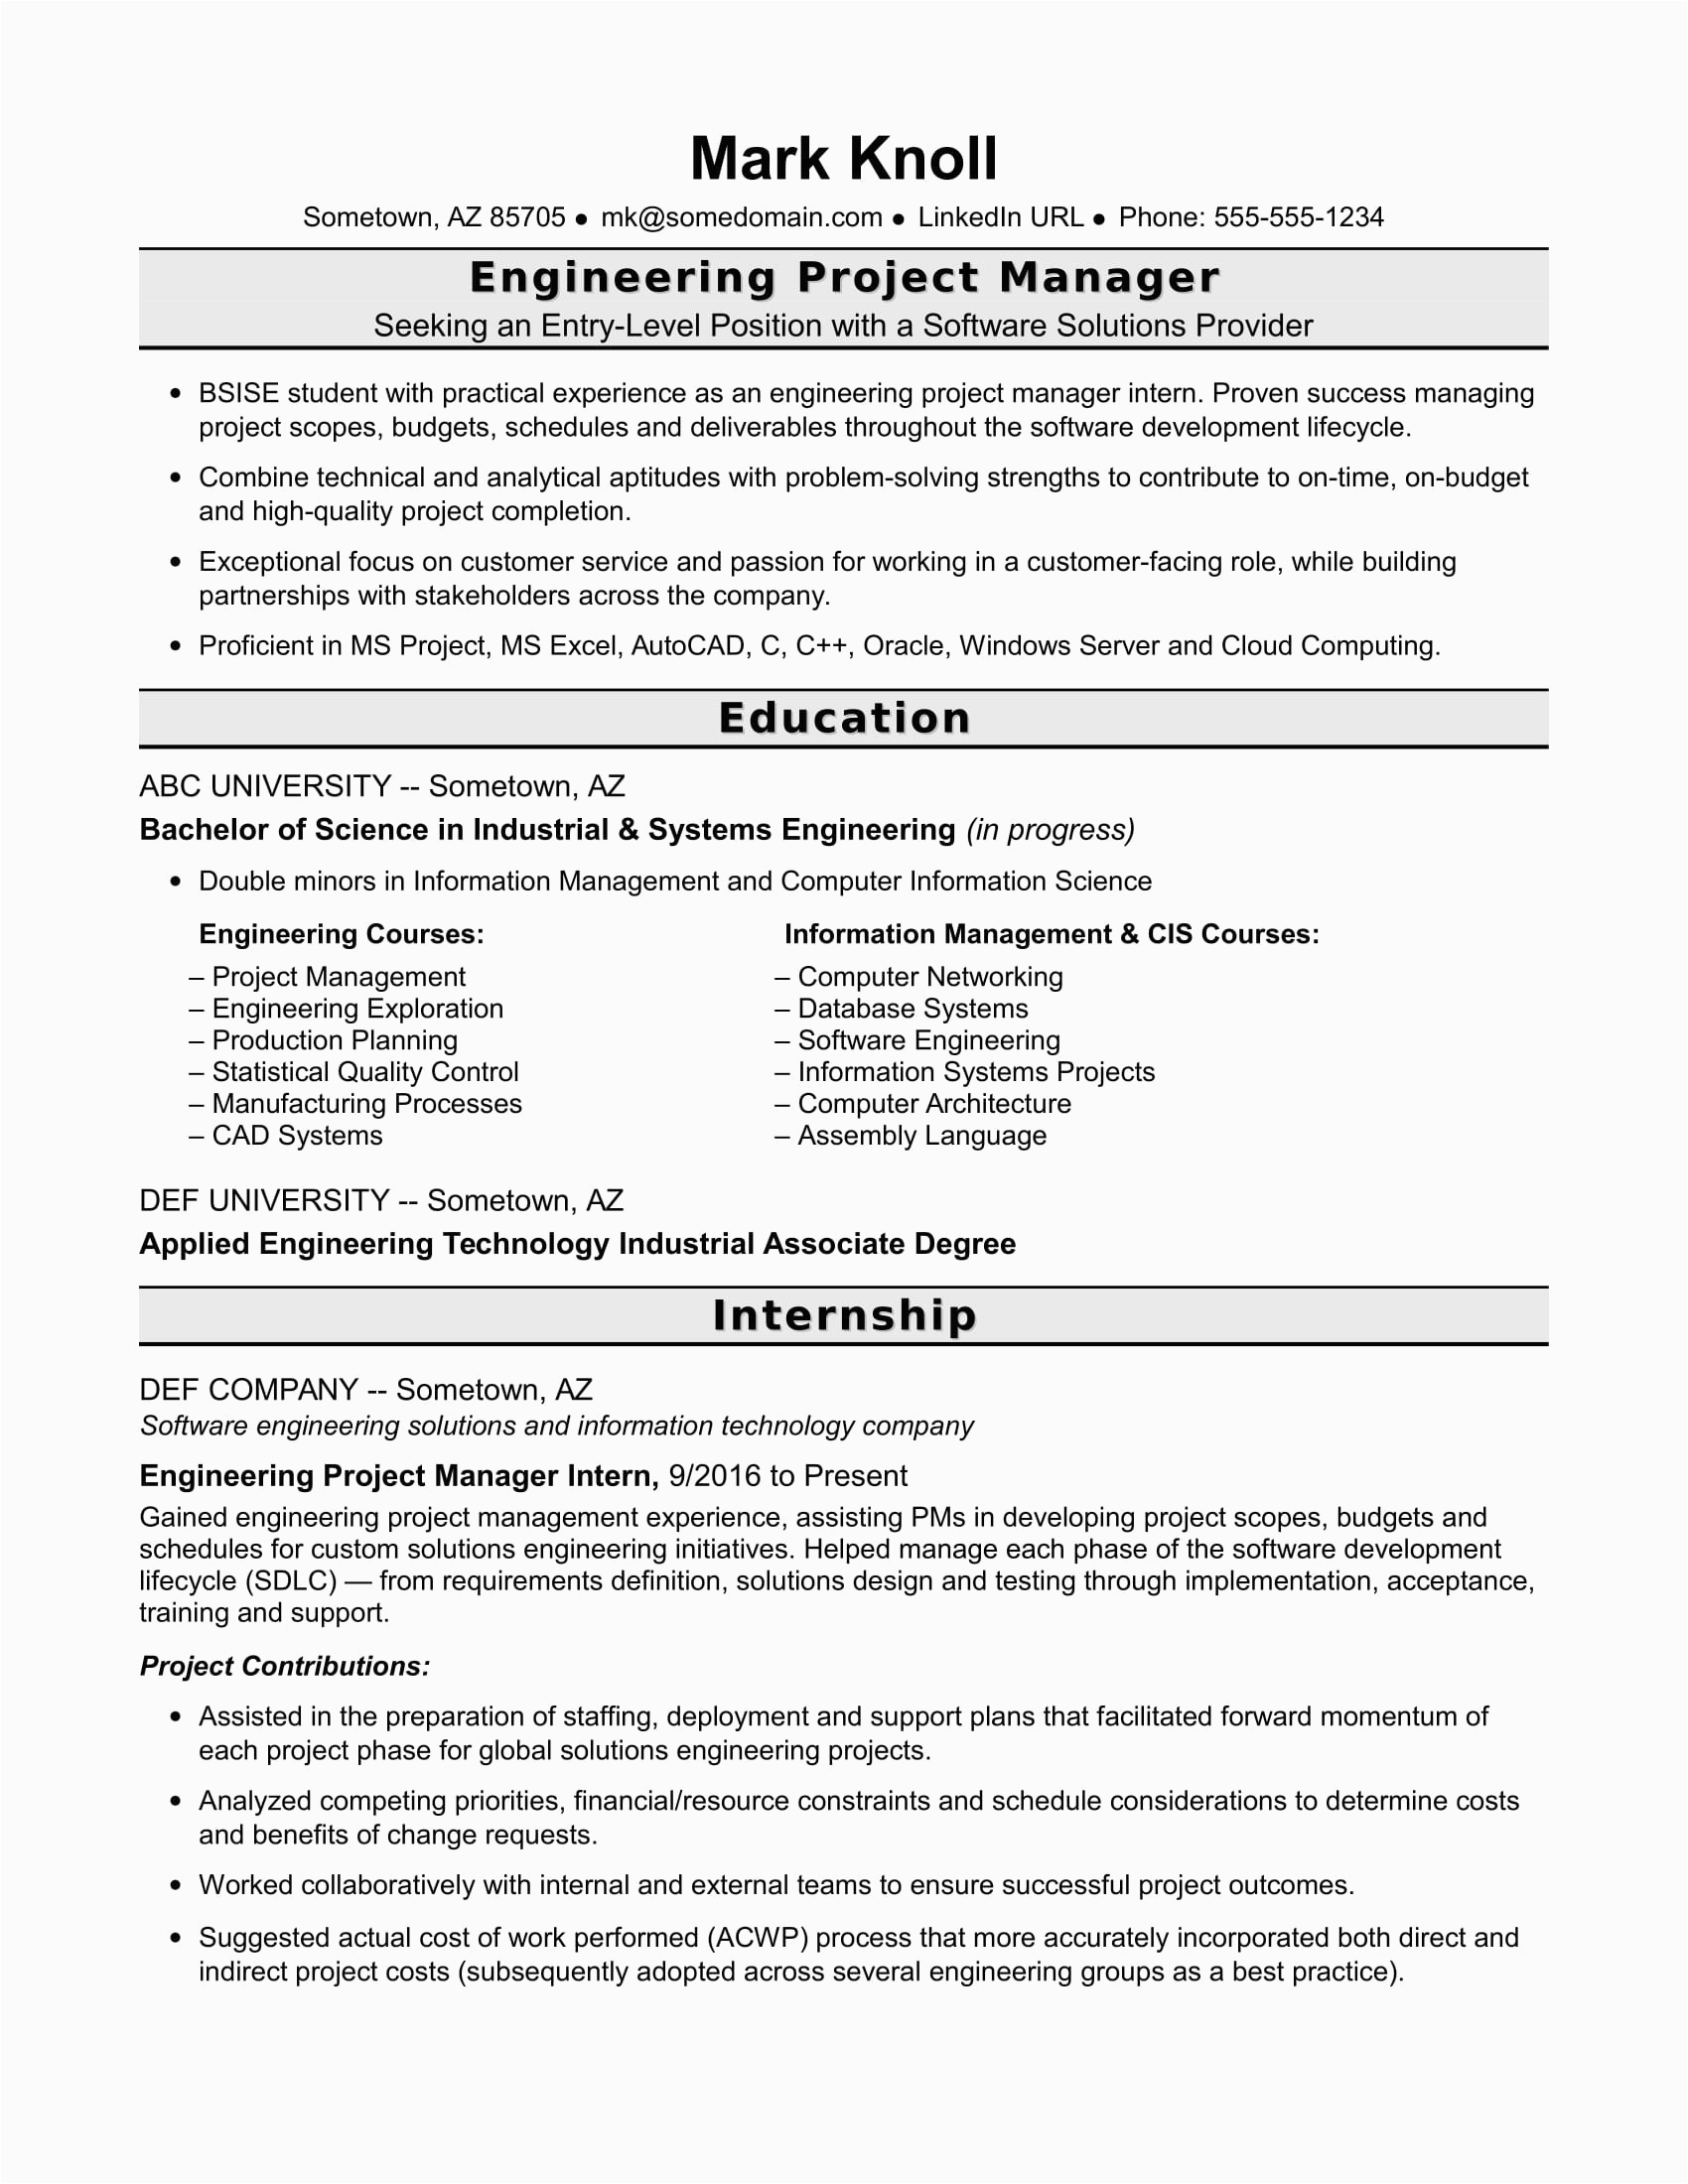 Resume Sample for A Project Manager In Engineering Entry Level Project Manager Resume for Engineers